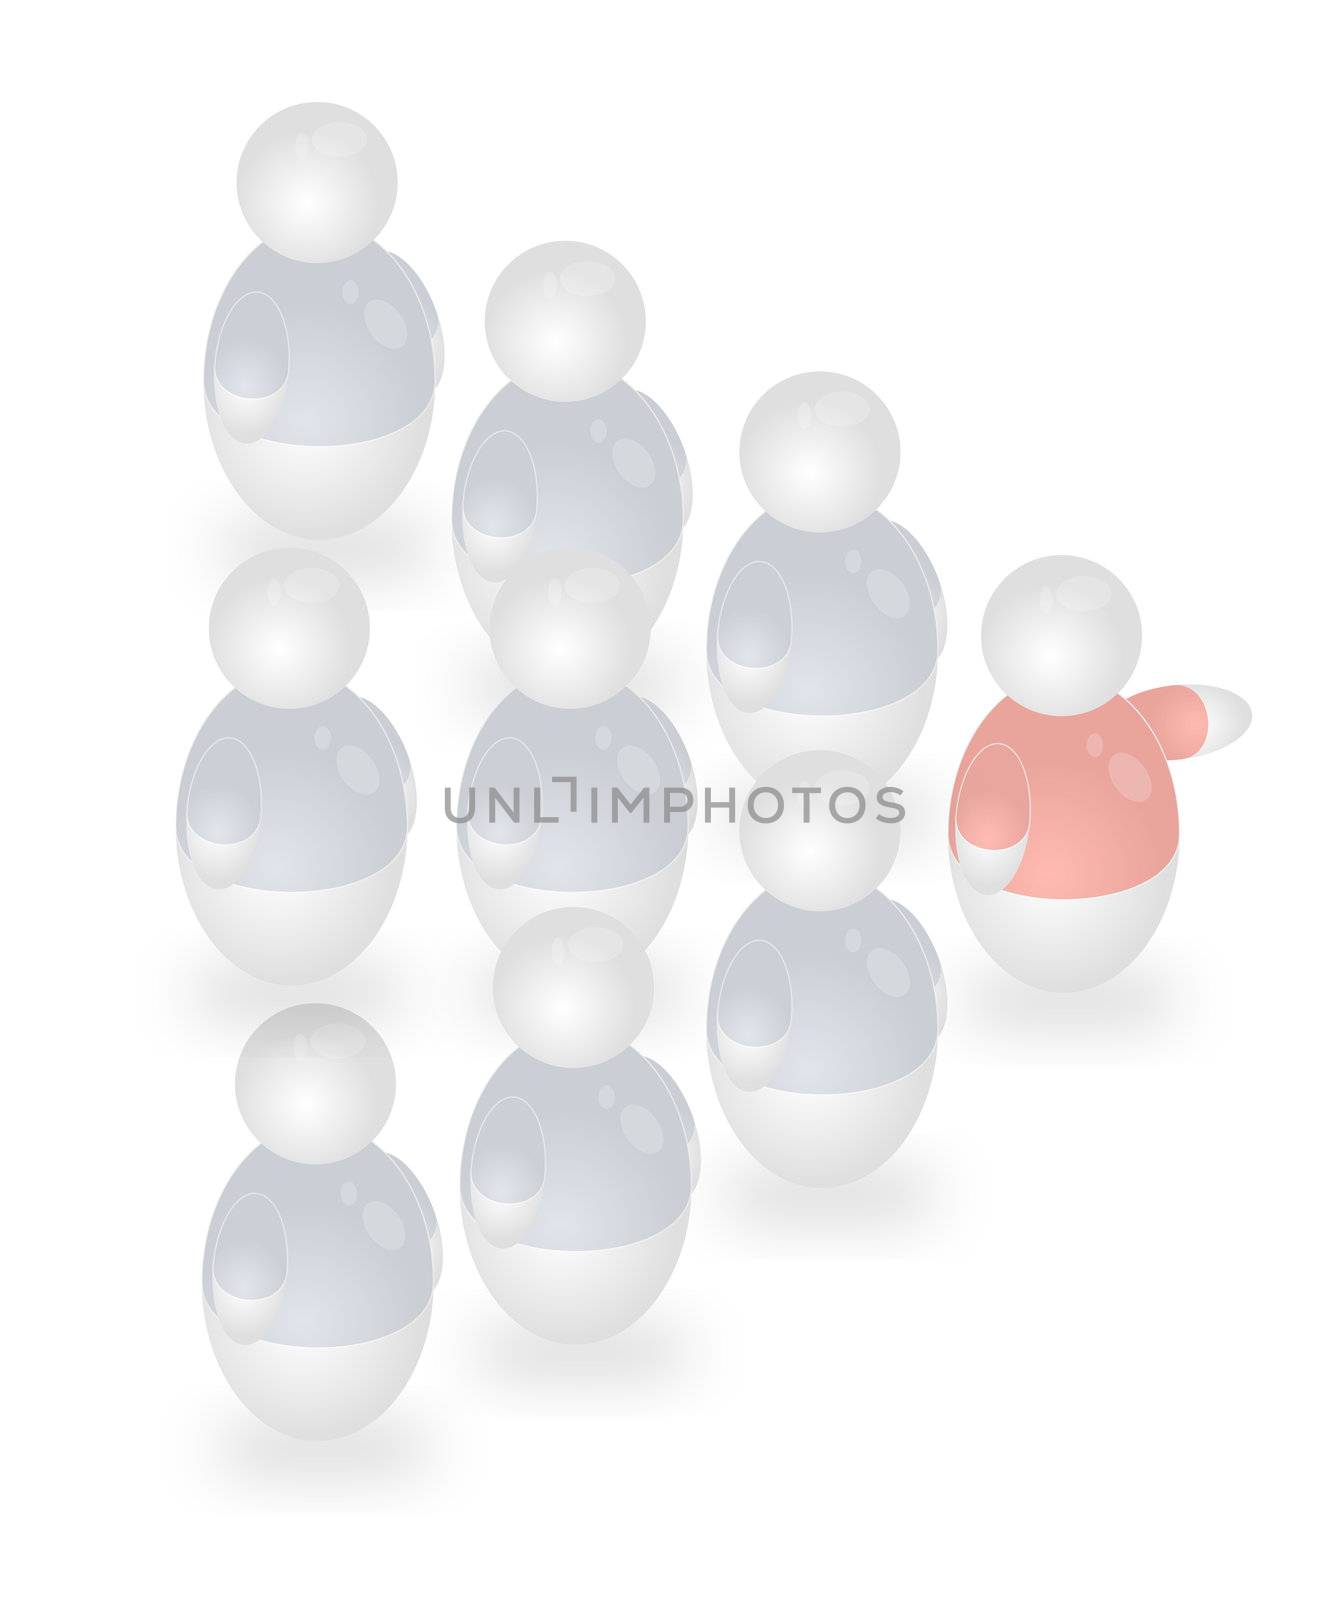 A troup of stylized persons following their leader. All isolated on white background.